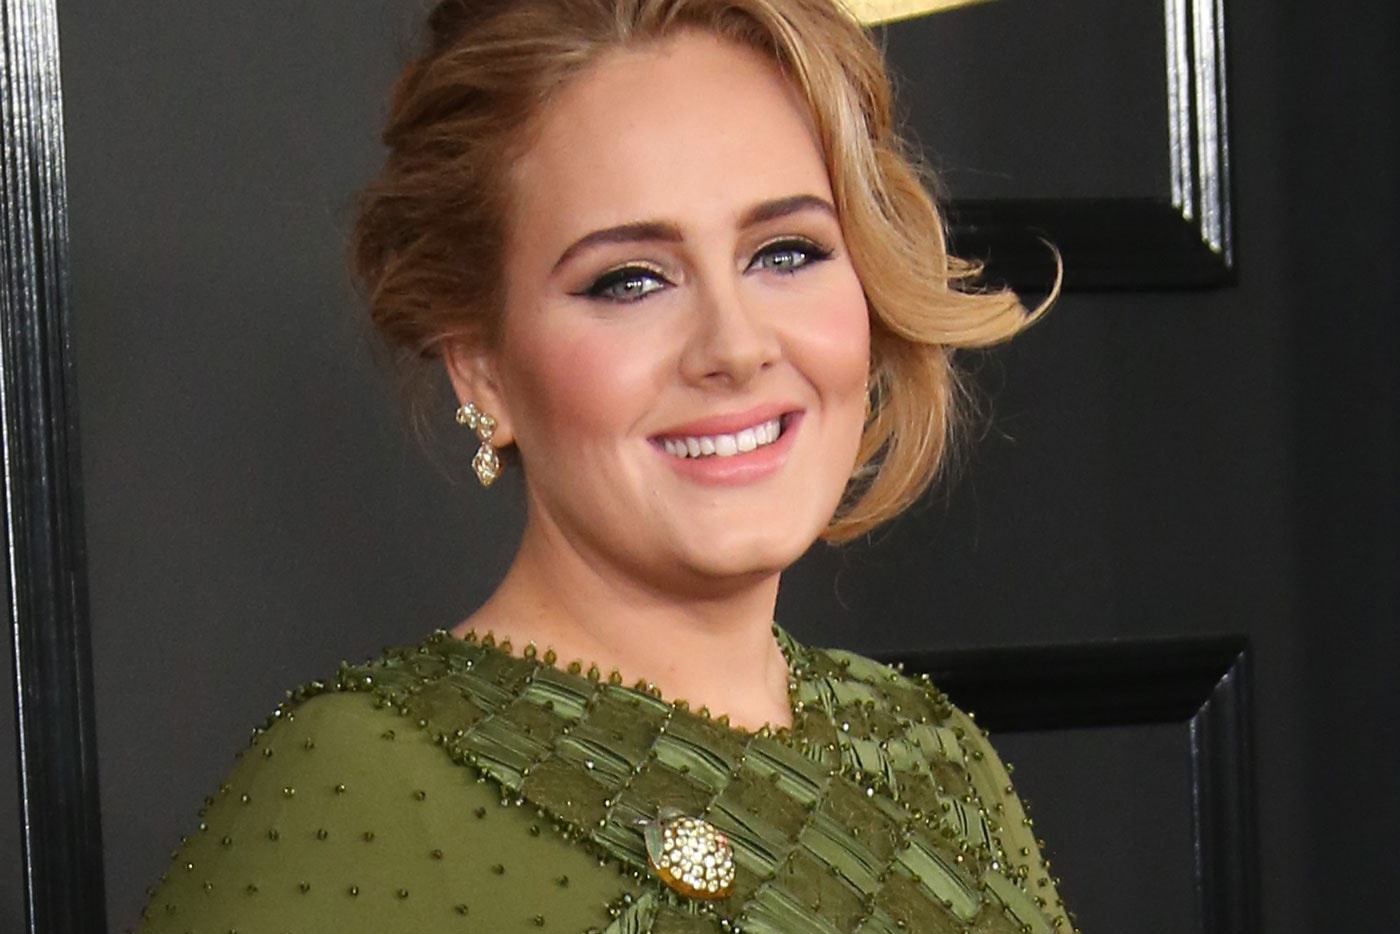 Adele's "Hello" Gets Knocked Off the No. 1 Spot